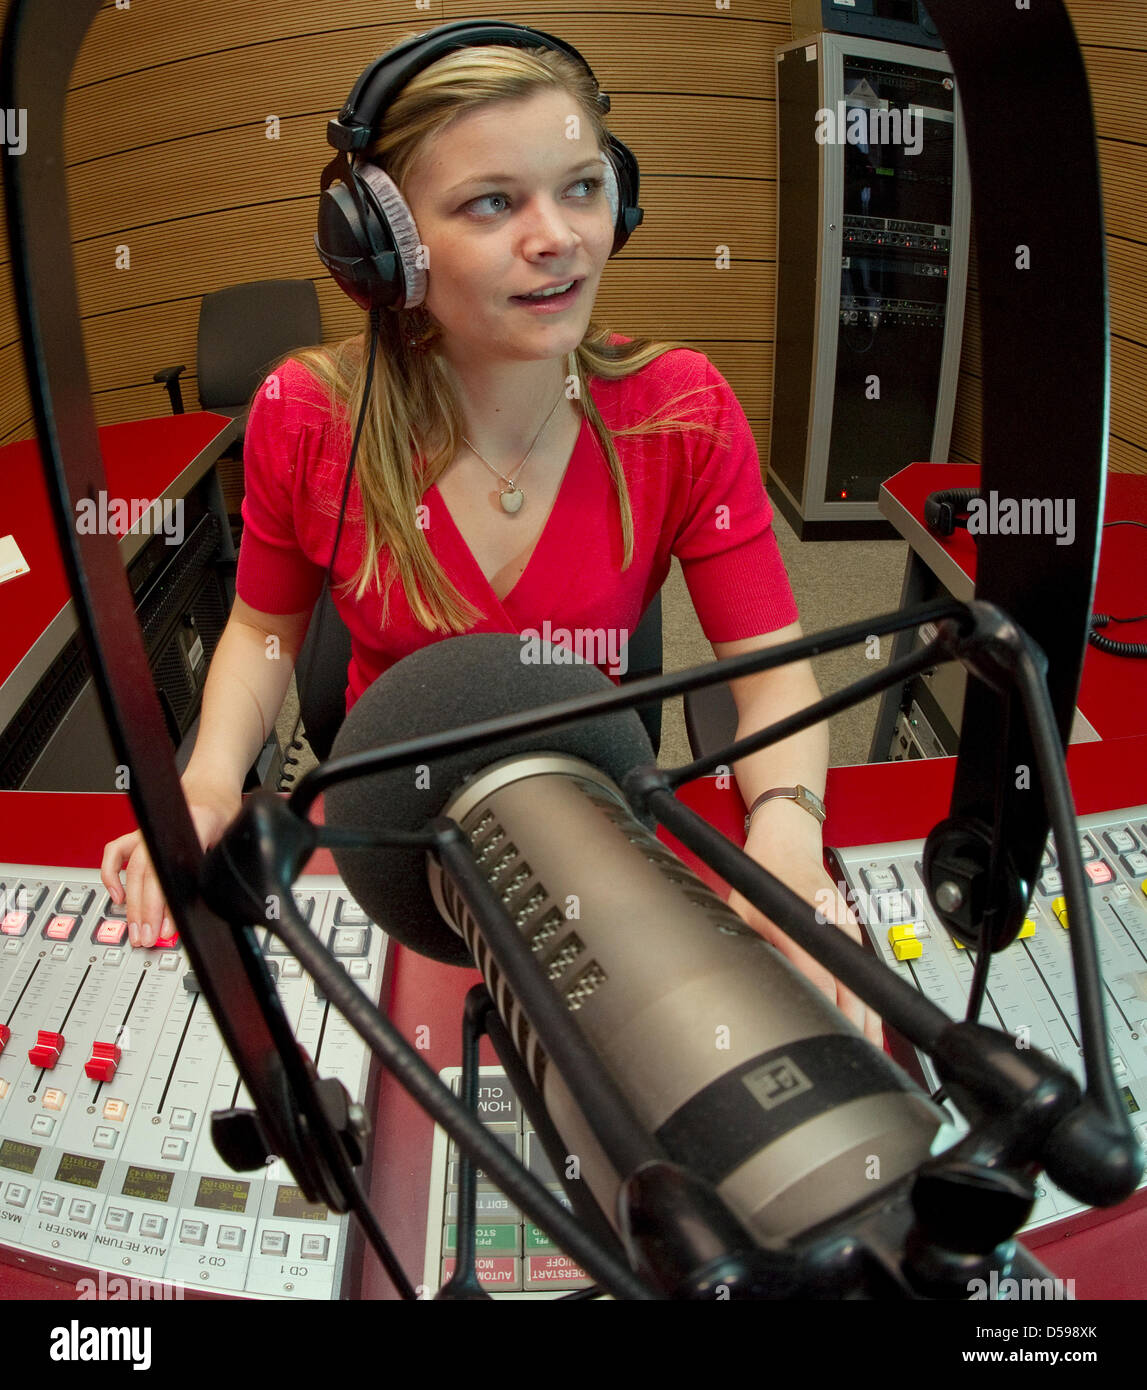 Vera Wolfskaempf, radio station Mephisto 97.6 host and student of  journalism, prepares her morning broadcast show at the university of  Leipzig, Germany, 28 May 2010. The radio station celebrates its 15th  birthday